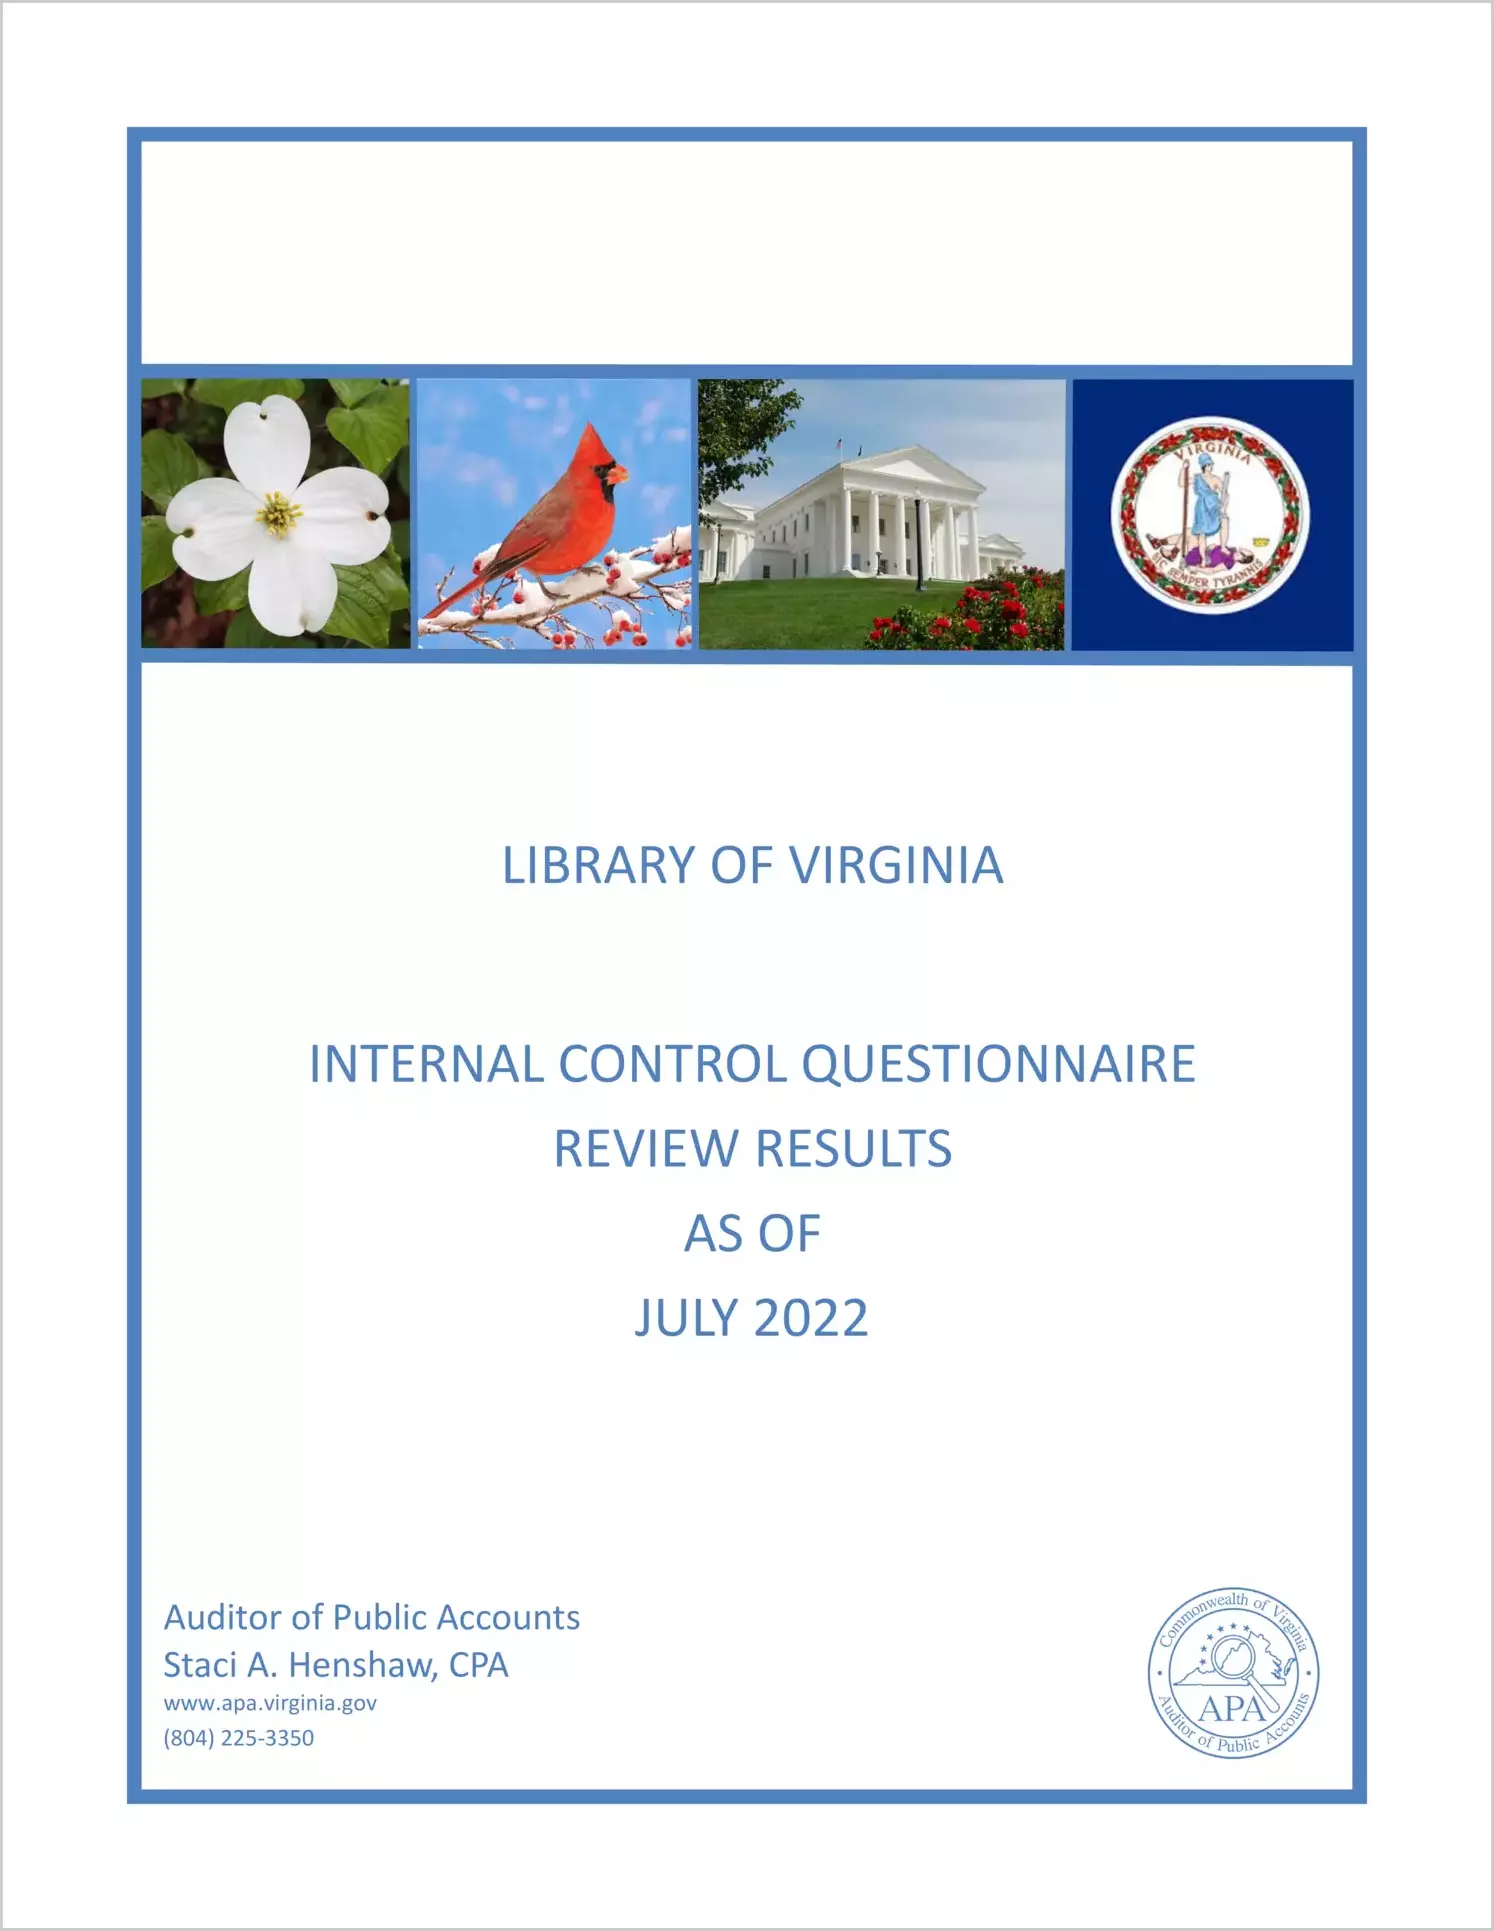 Library of Virginia Internal Control Questionnaire Review Results as of July 2022